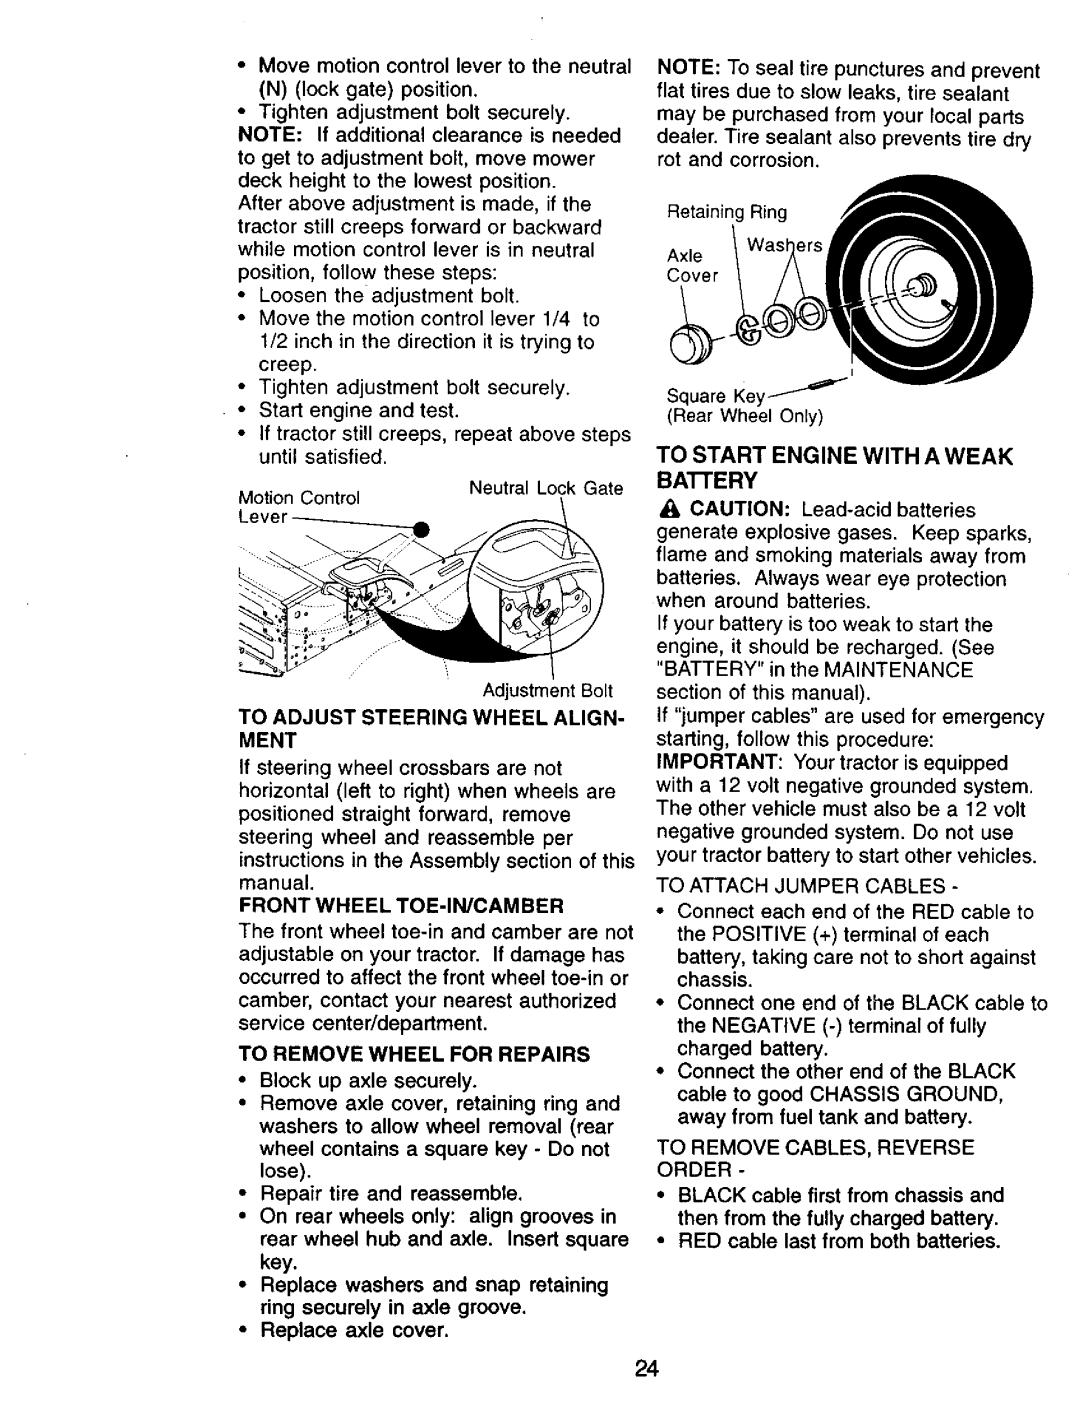 Craftsman 917.271142 manual TO START ENGINE WITH A WEAK BAI-rERY 